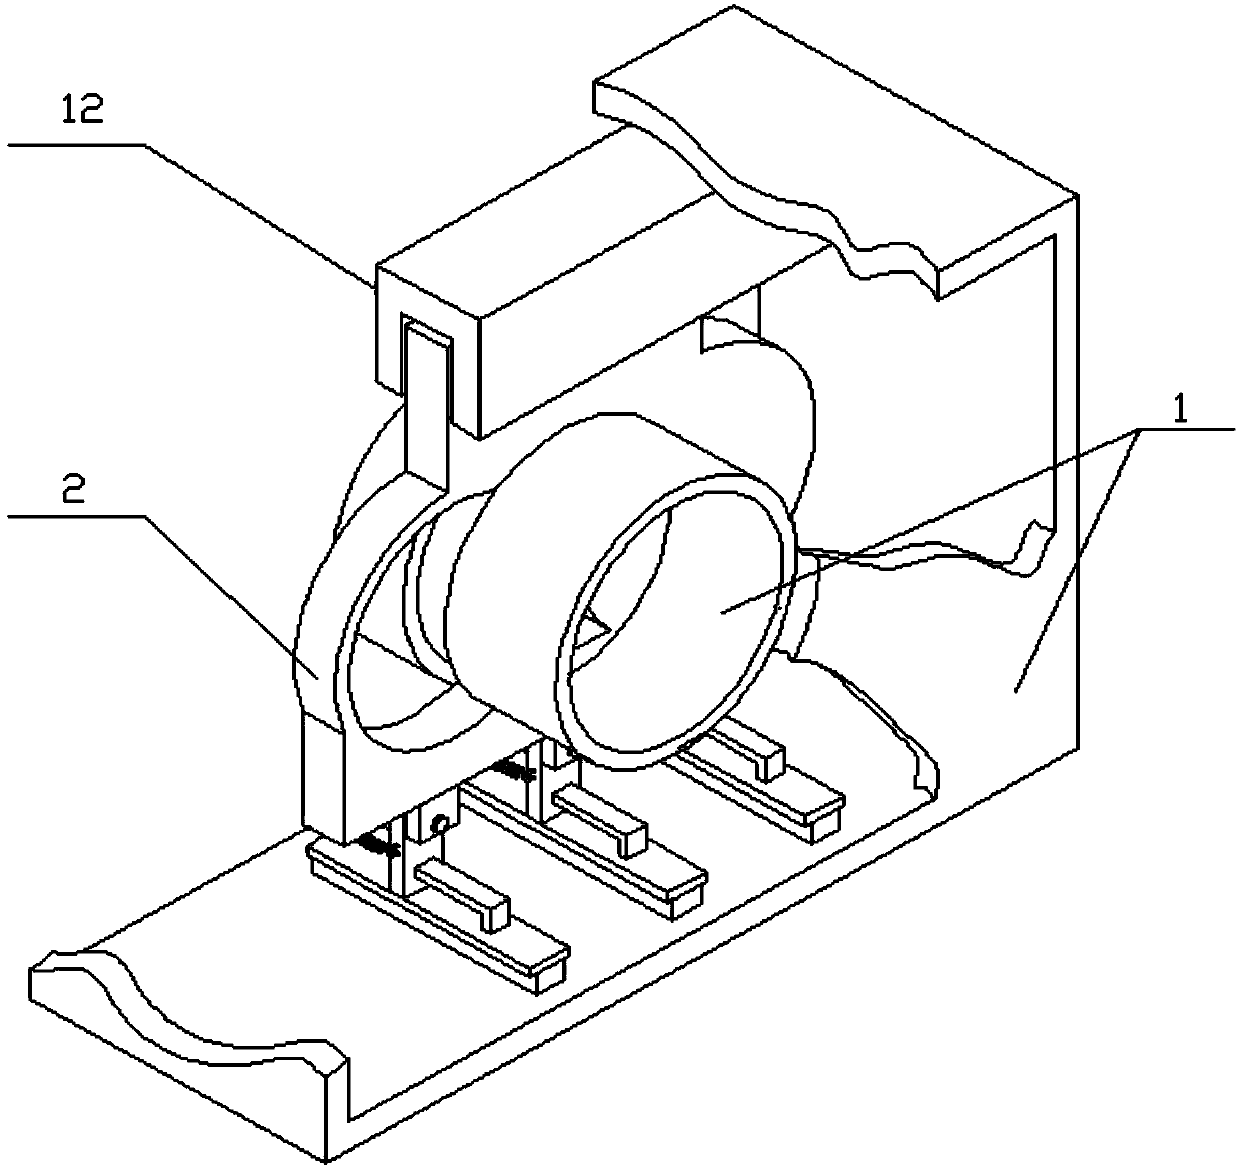 Closed-type glasses valve with cleaning unit